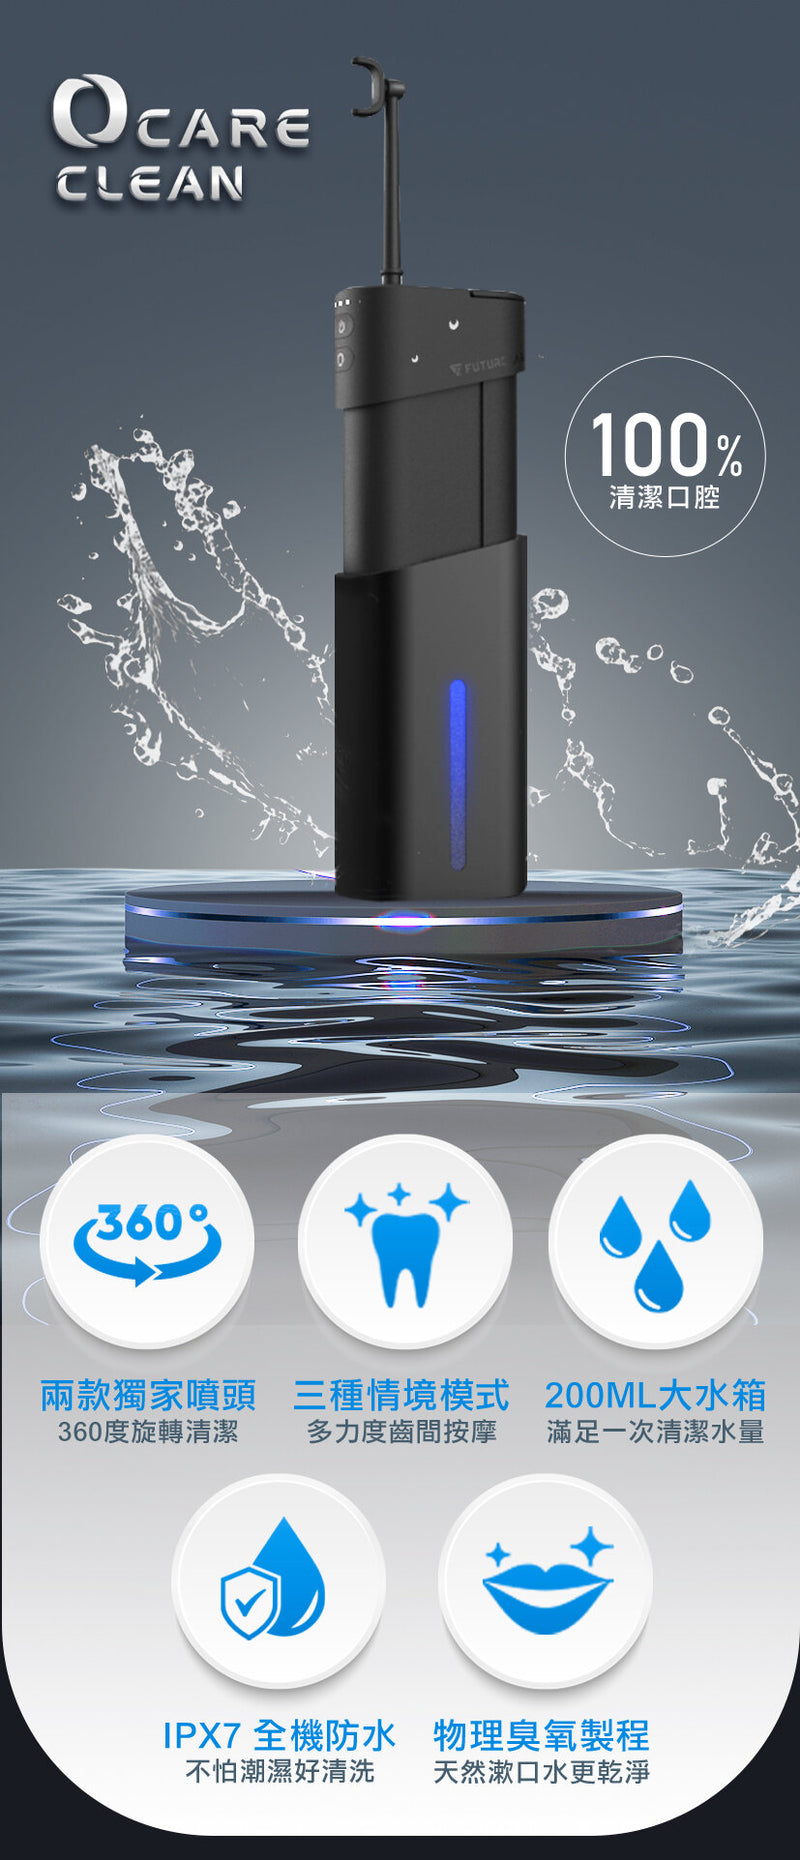 Future Lab - OCare Clean Blue Oxygen Teeth Scaling Machine | Active Oxygen Mouthwash | Electric Water Flosser | Irrigator | Wireless | Portable FG14990